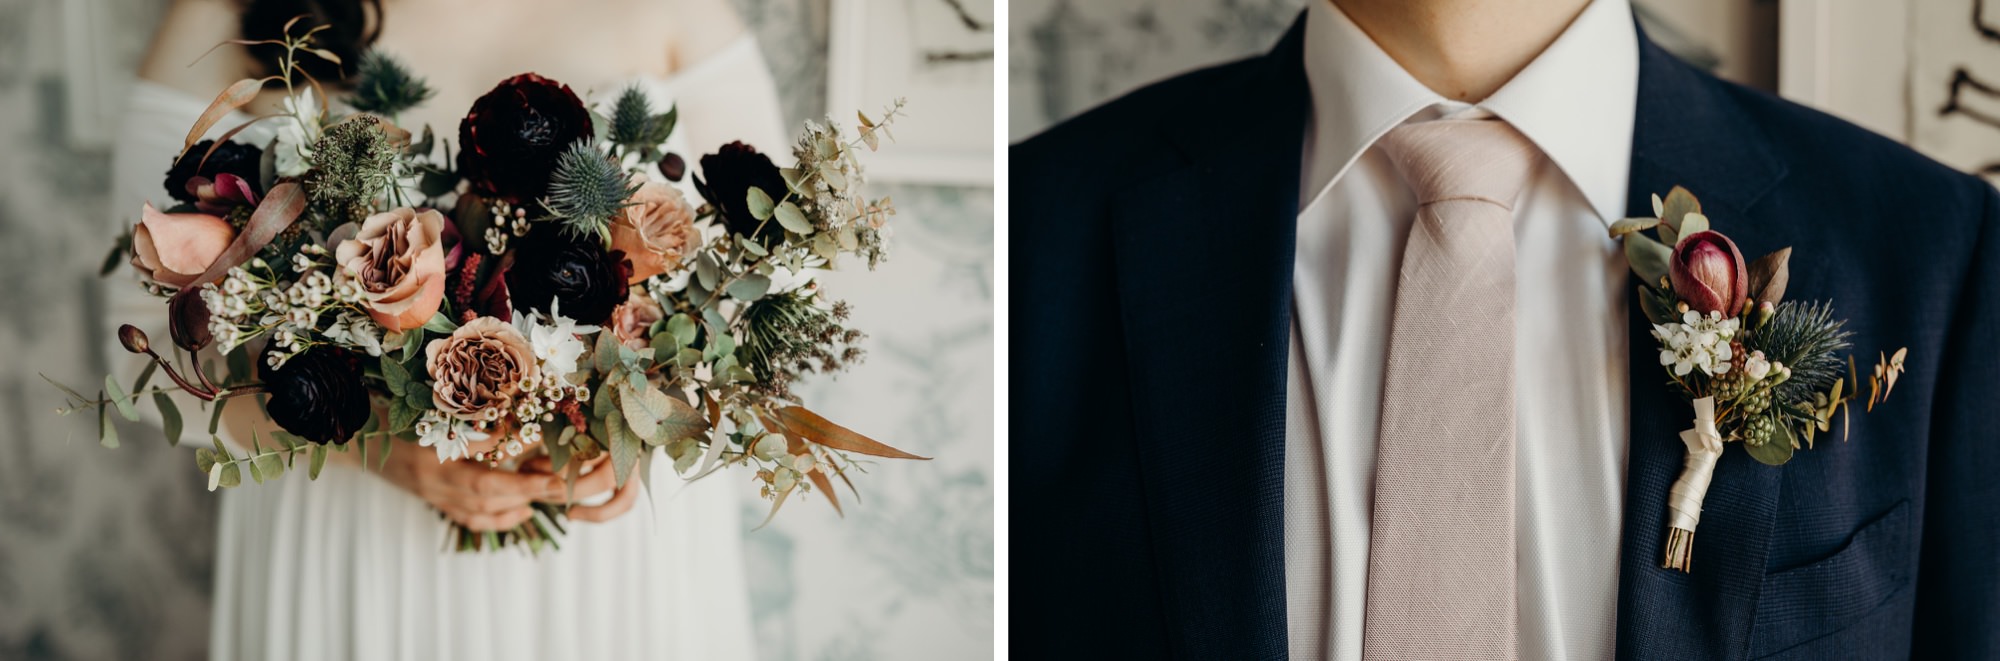 wedding bouquet and boutonniere at the wythe hotel in brooklyn, nyc